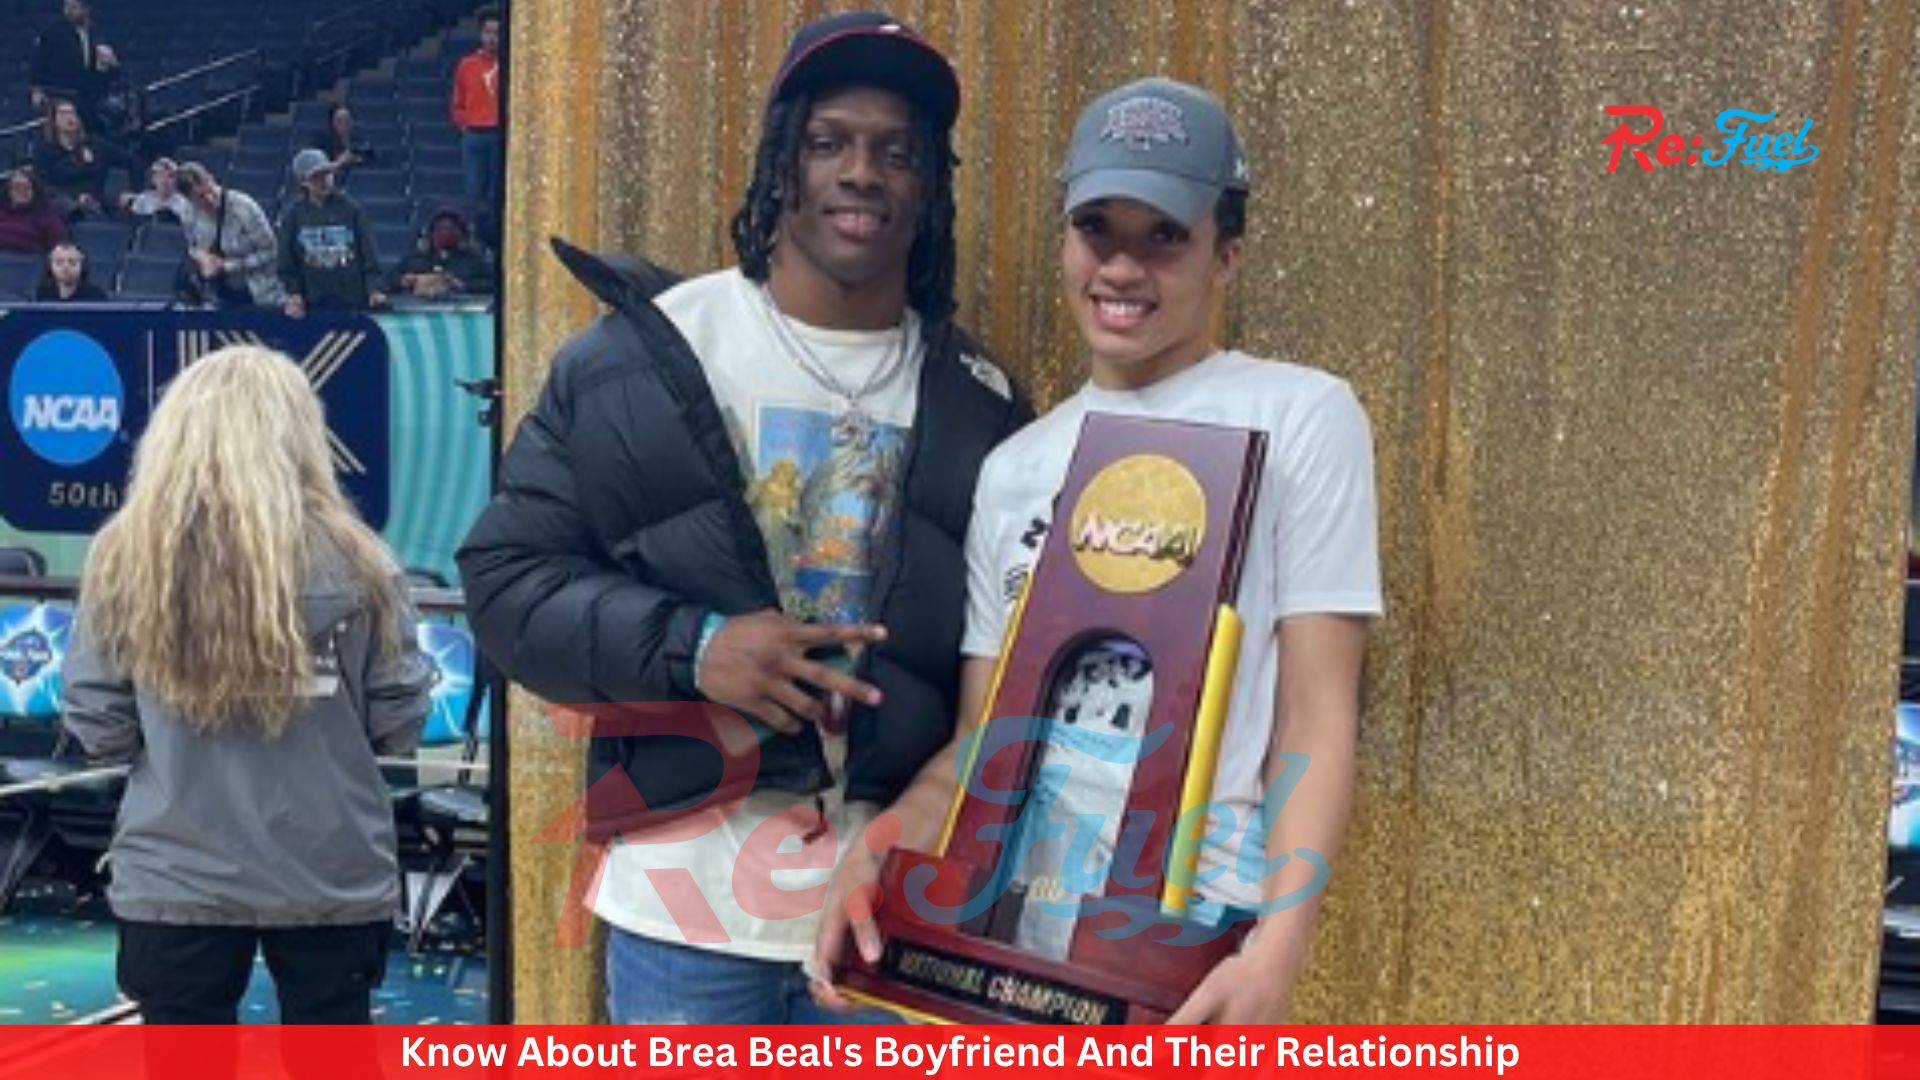 Know About Brea Beal's Boyfriend And Their Relationship